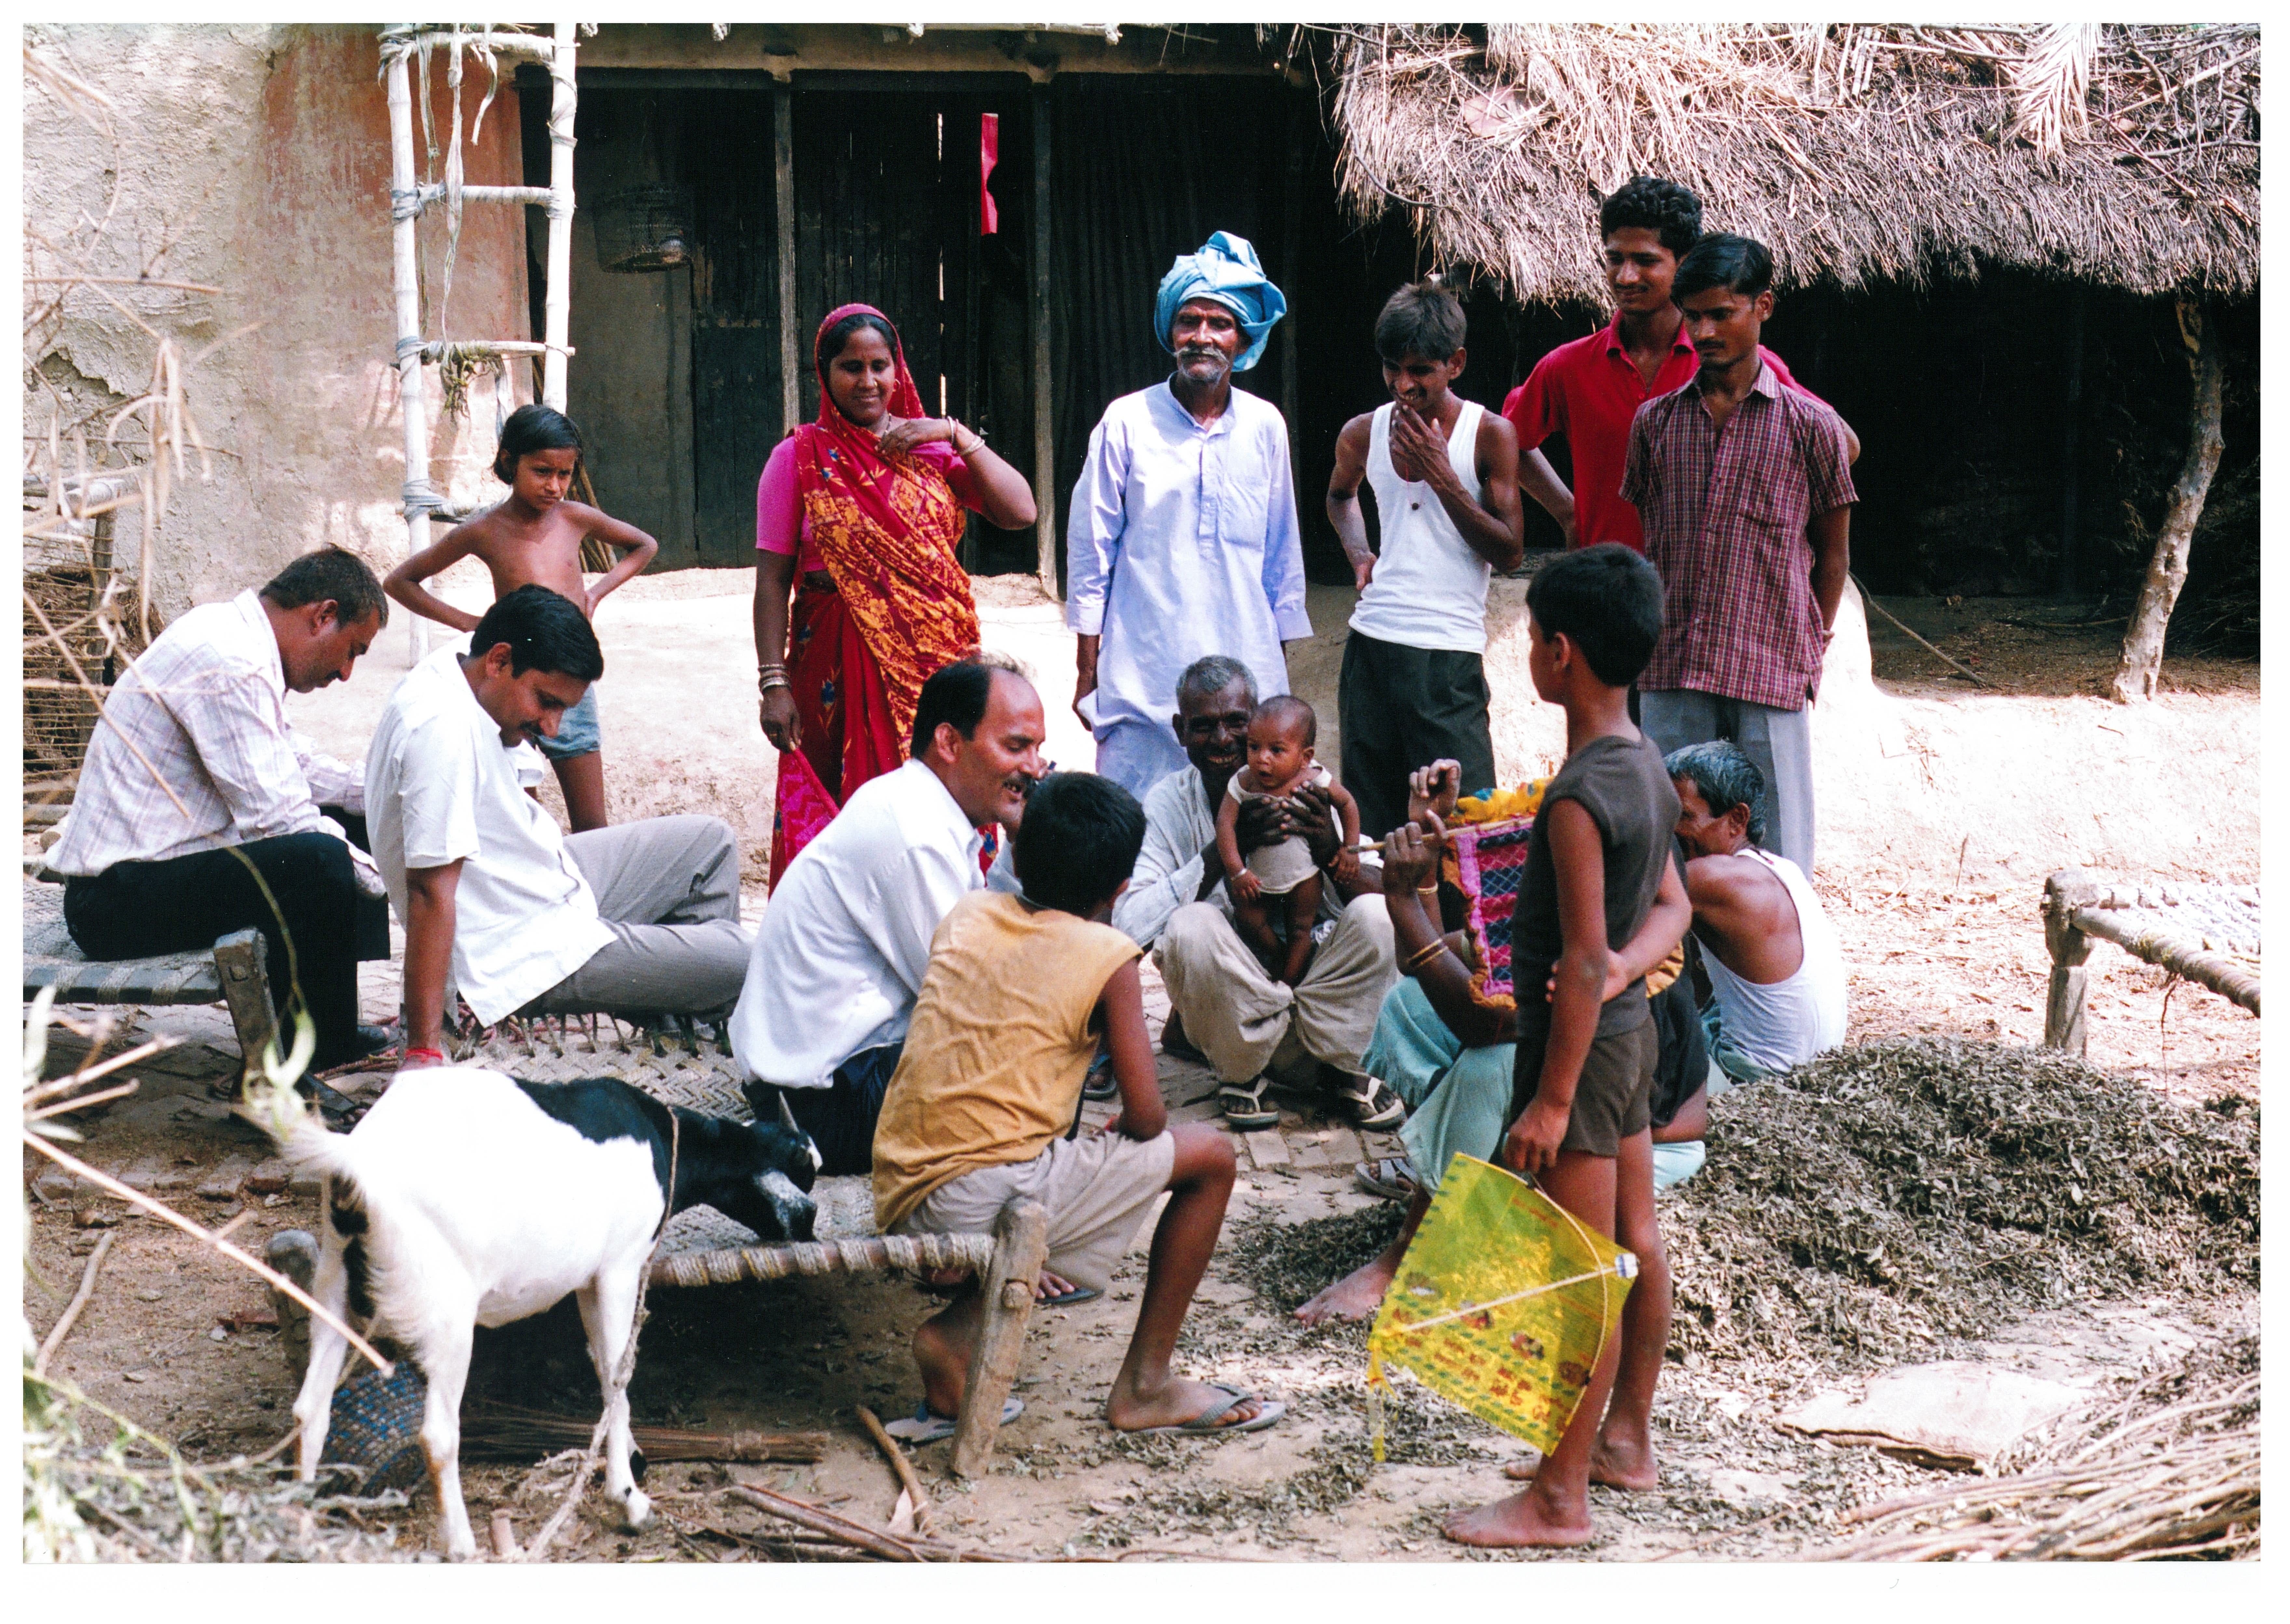   In this photo, everyone, including the baby, appears to be paying attention to the person sitting in the center. Rakesh took this photo in 2007 when he visited his village in India where he spent first two years of his life.  This was his first visit to the village in nearly 50 years. 